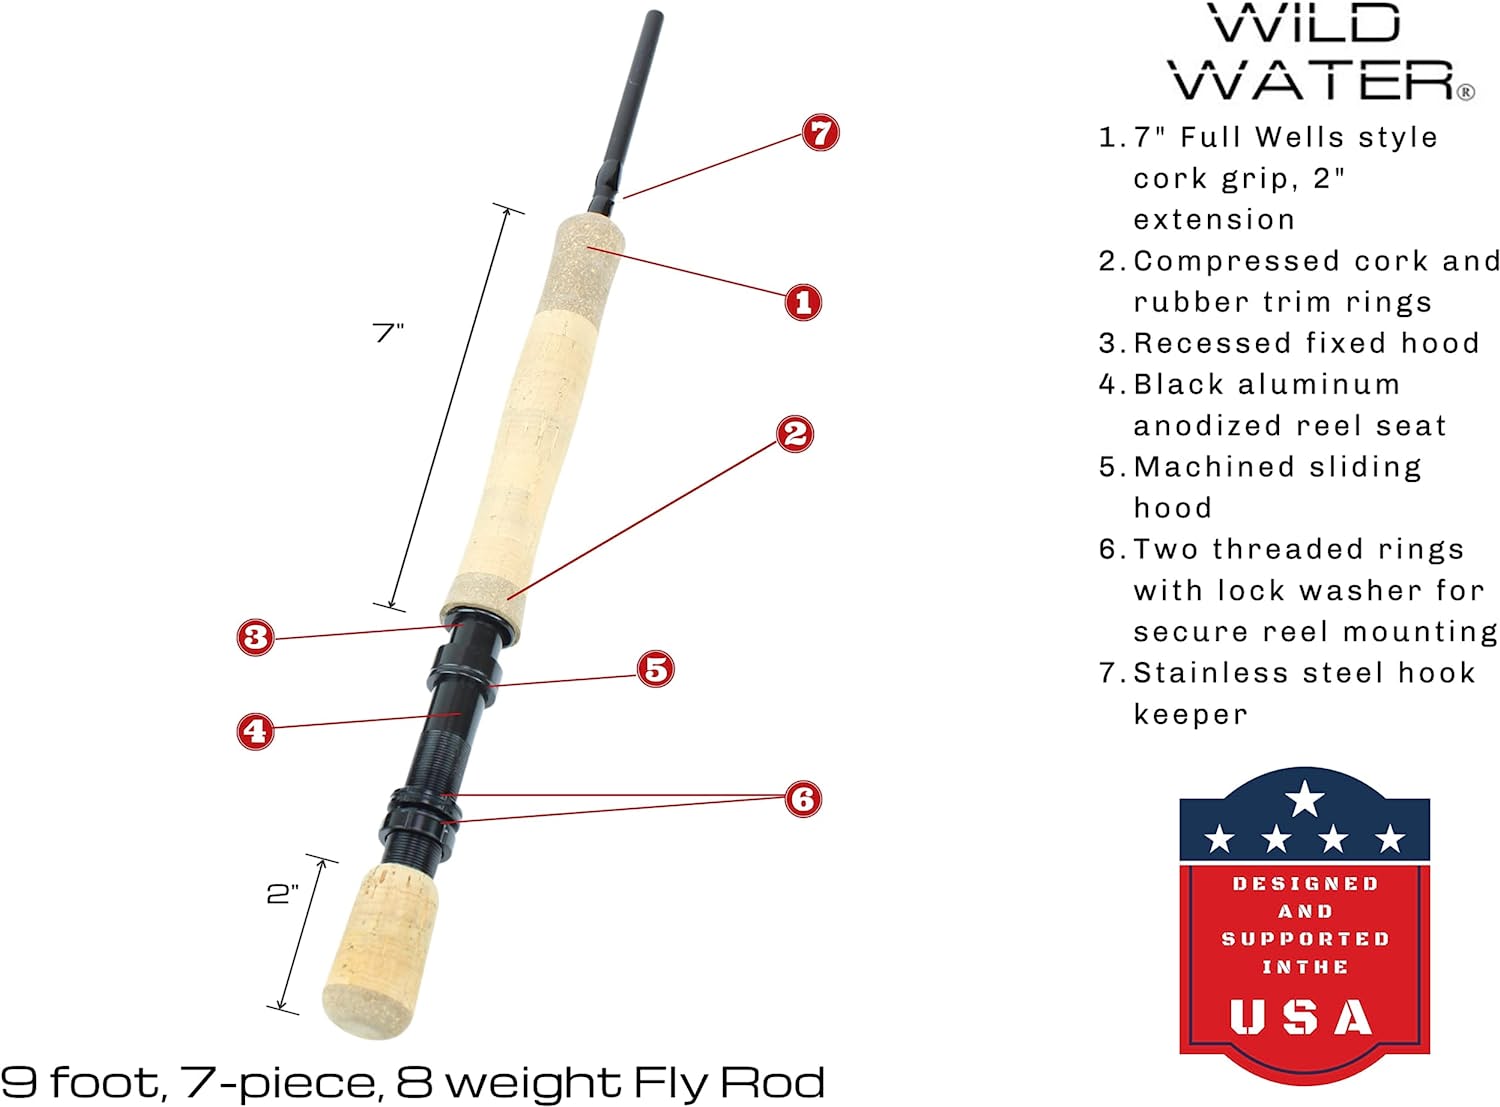 Wild Water Standard Freshwater Fly Fishing Combo, 9 ft 8 wt 7 Piece